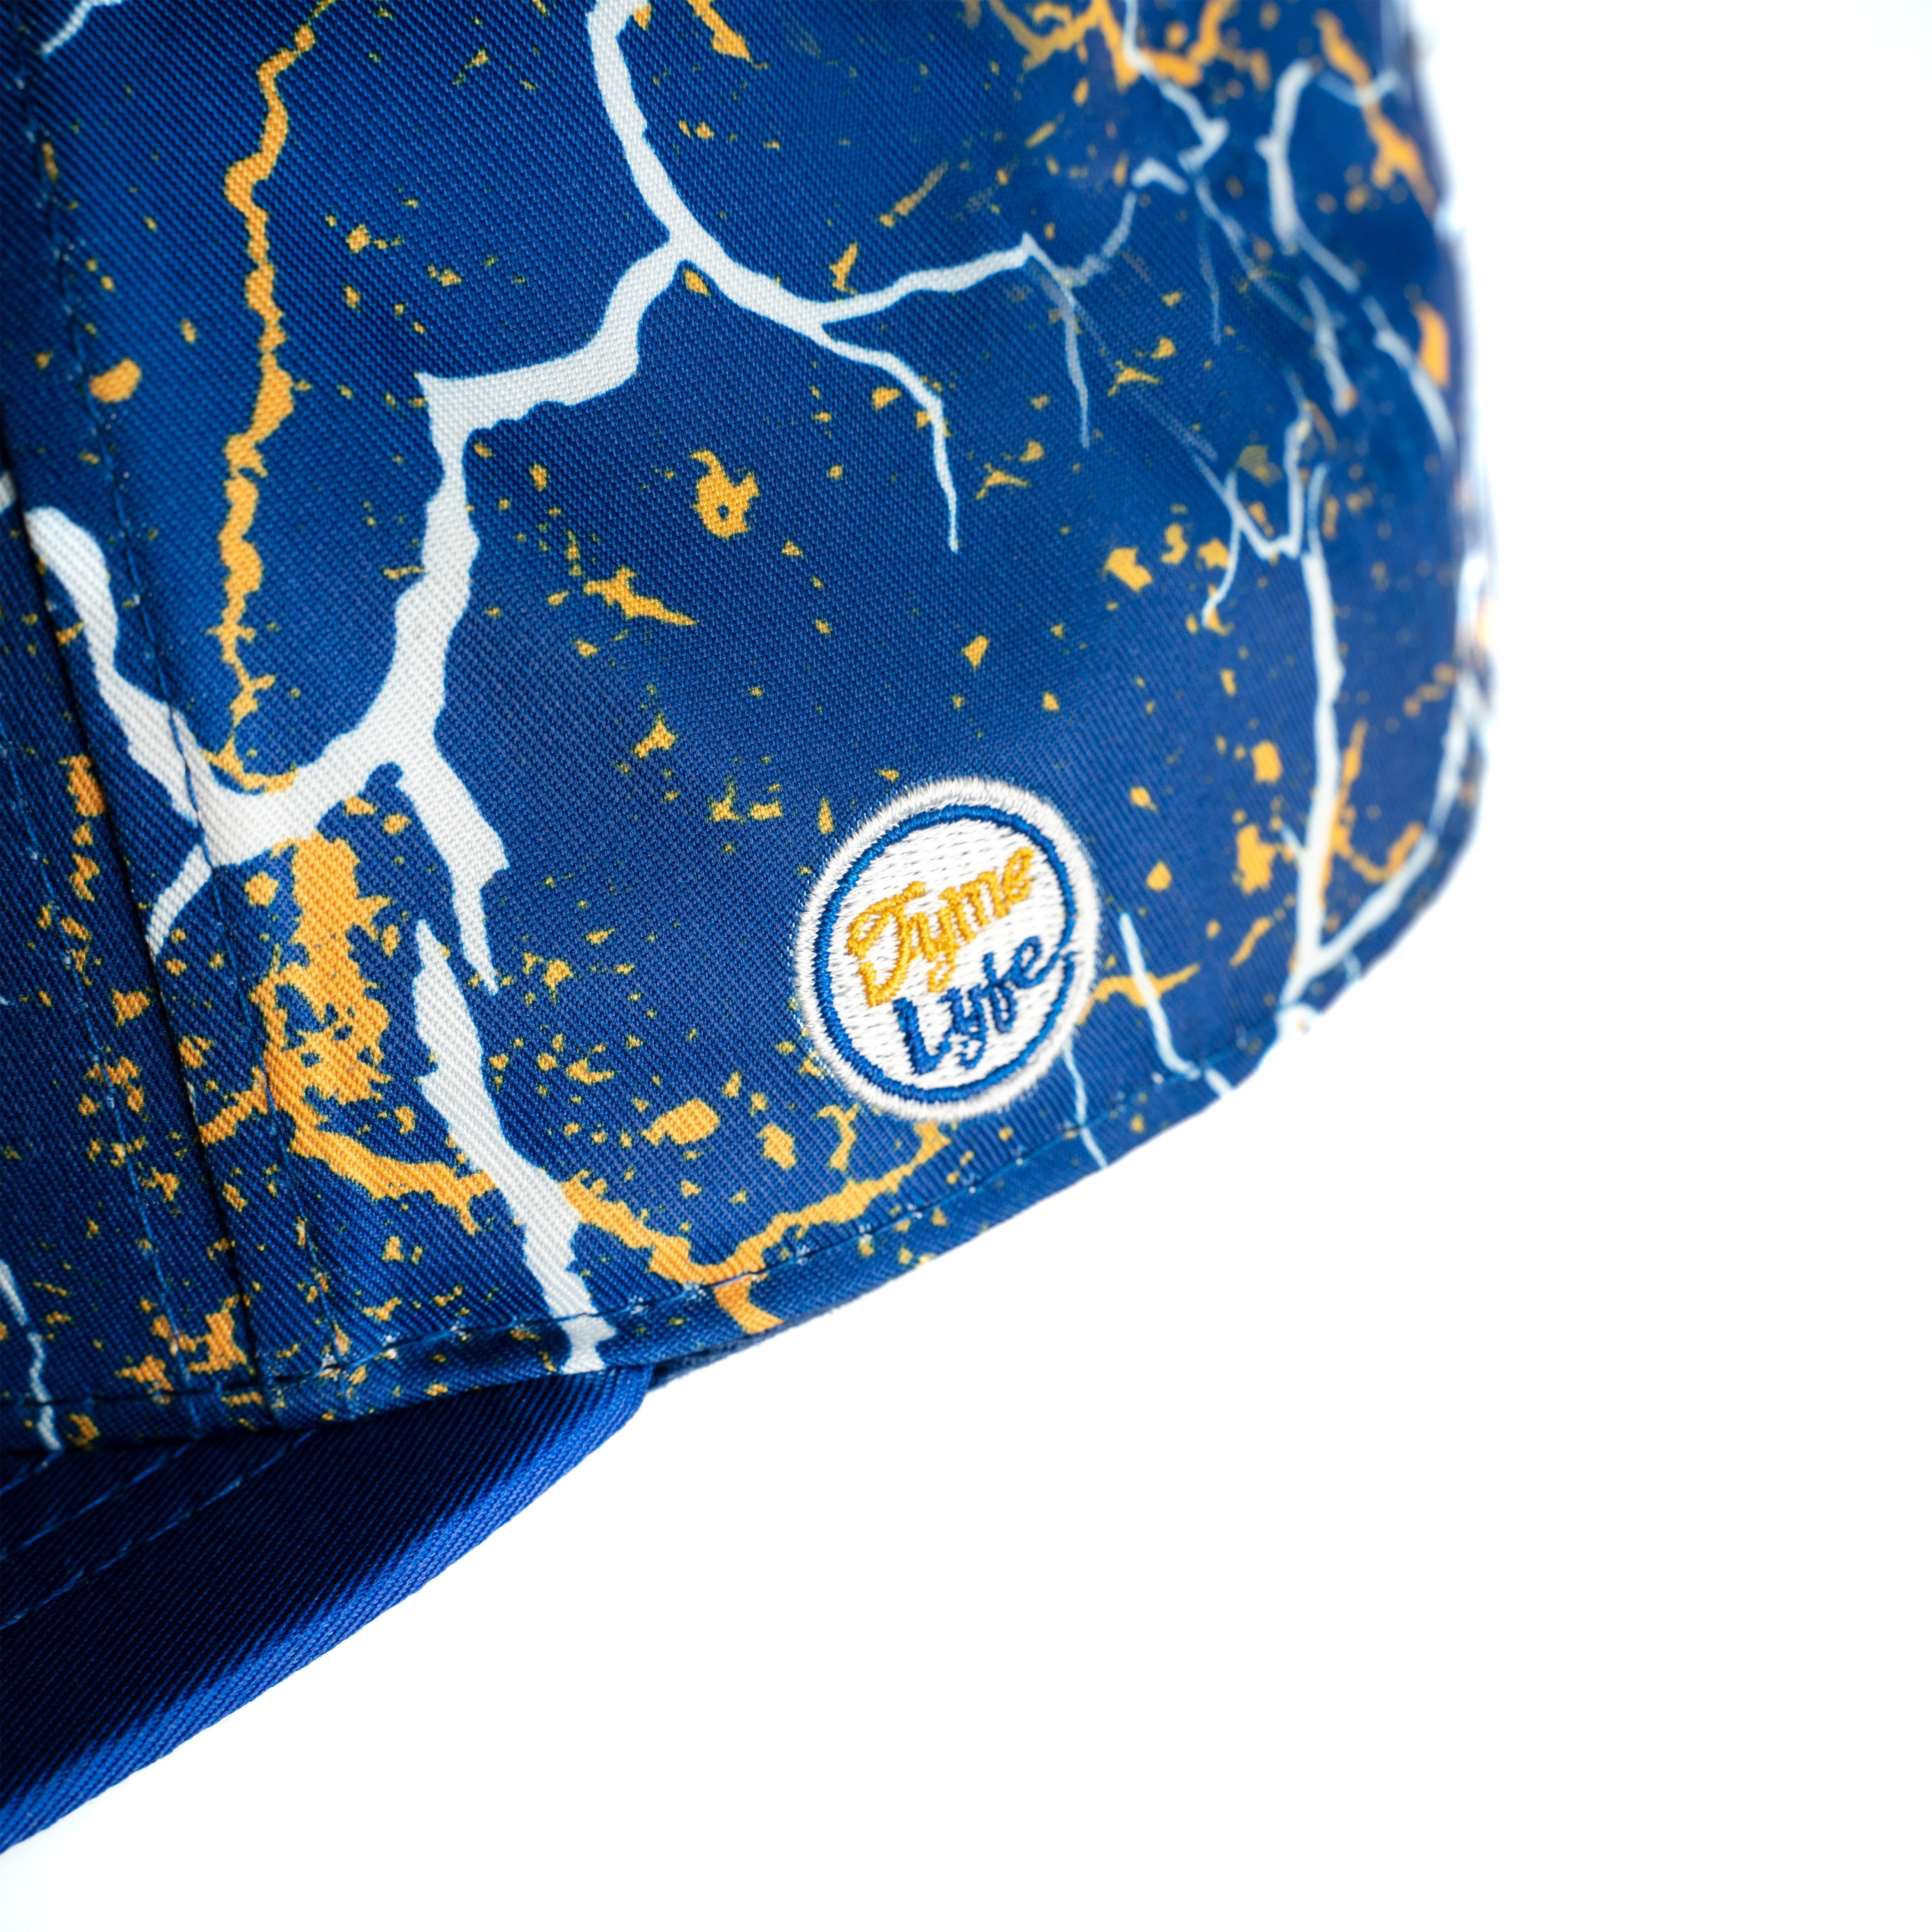 Pittsburgh Panthers Storm Snapback